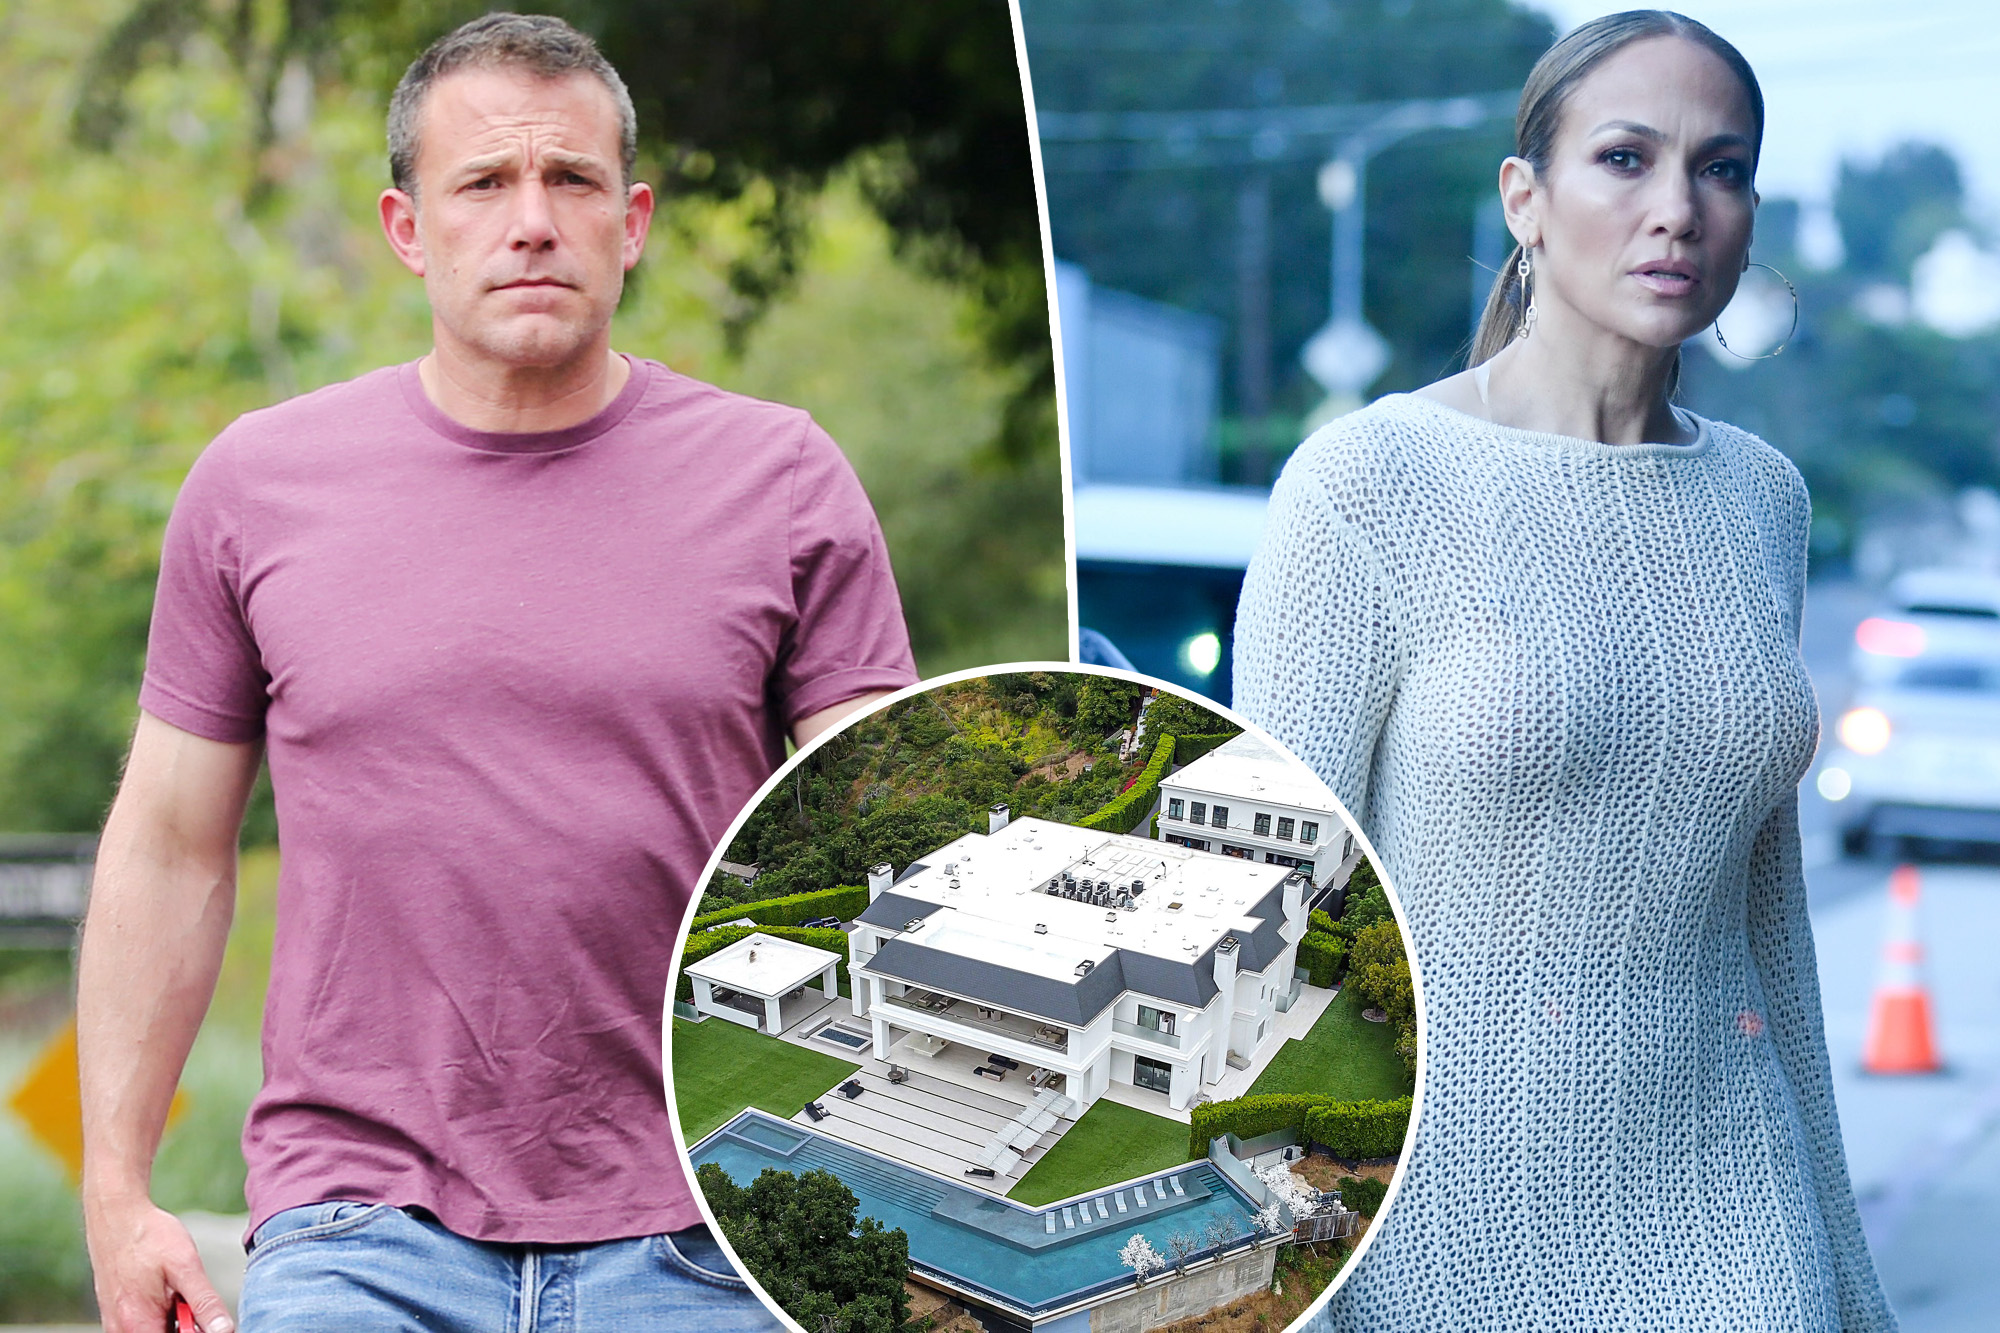 The real reason Jennifer Lopez, Ben Affleck are selling $60M home amid divorce rumors